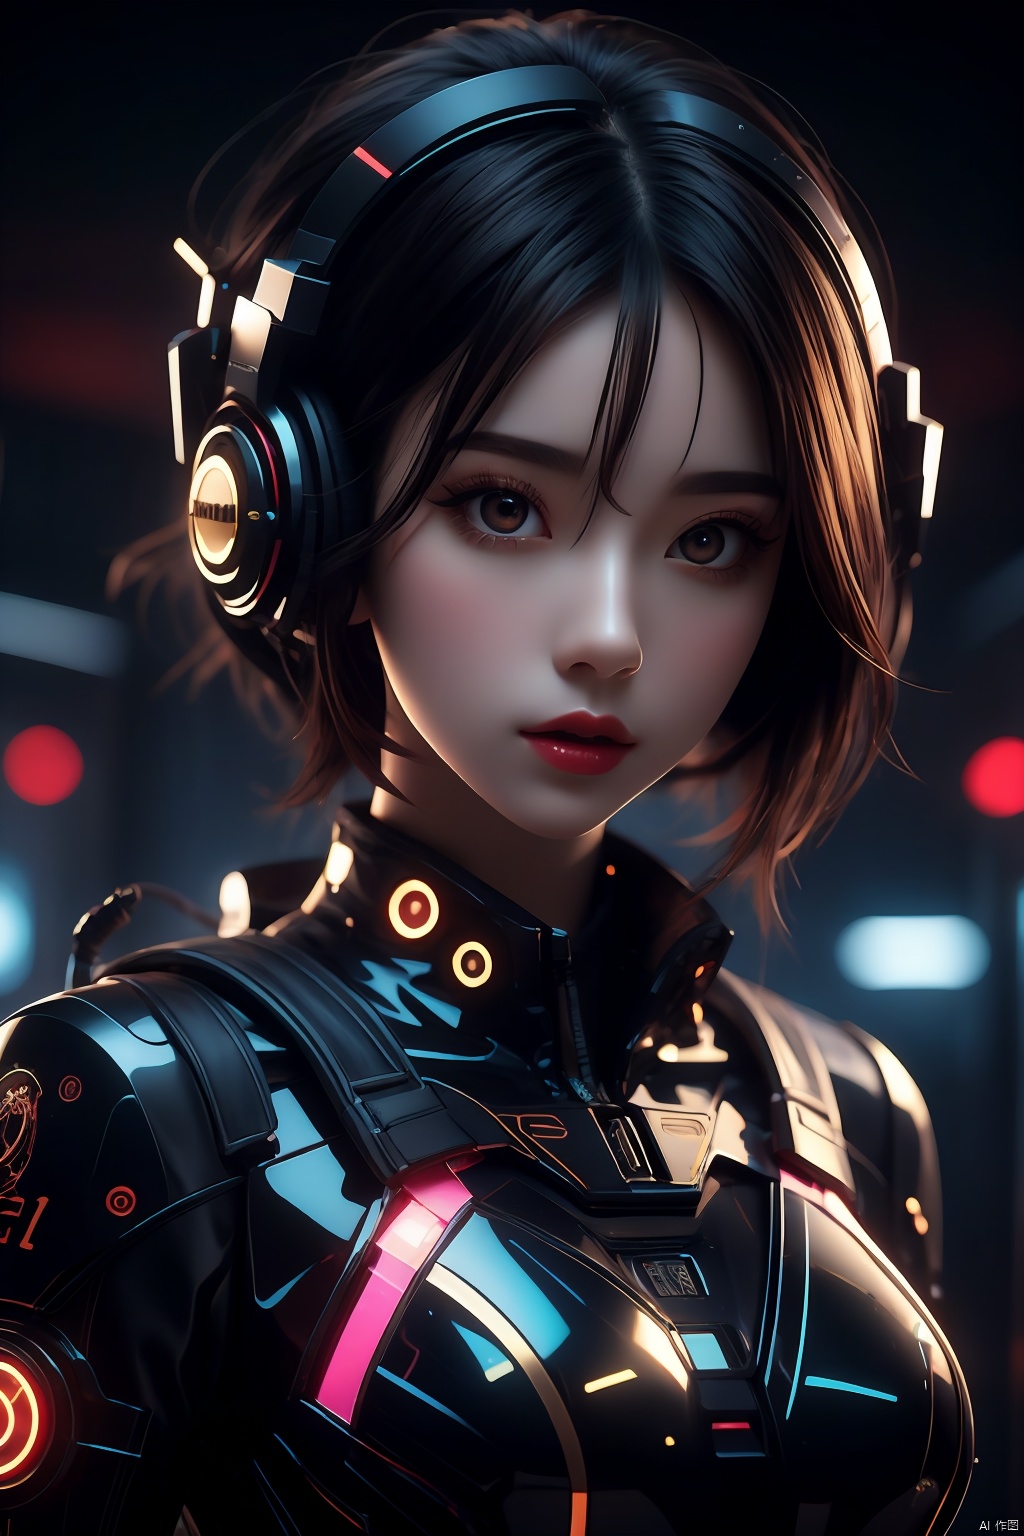  Li's cyberpunk world, Best Quality, Lenovo AIPC, Laptop: 1.4, ((Holographic Interface)), 1girl, Short Hair, Short Pink, Punk, Cyber, Blur, English Text, Glow, Headphones, Neon Decoration, ((ASCII Art)), Detail, in a world where high-tech and a dark future are intertwined. She wears advanced goggles and shows off the stunning visuals of the graphics card. In this picture, a professional gaffer uses the technology of ring light and backlight to make Leda's image more three-dimensional, showing her determined eyes and heroic character.
In terms of composition, the photographer uses symmetrical composition and the golden section method, placing Lida in the center of the frame, highlighting her central position. At the same time, the lines and shapes in the picture are carefully designed to complement the cyberpunk style.
The angles of overhead and upward shooting are used to make the picture more visually impactful. The top-down angle shows Leda's mastery of the tech world, while the up-down angle highlights her authority and confidence.
